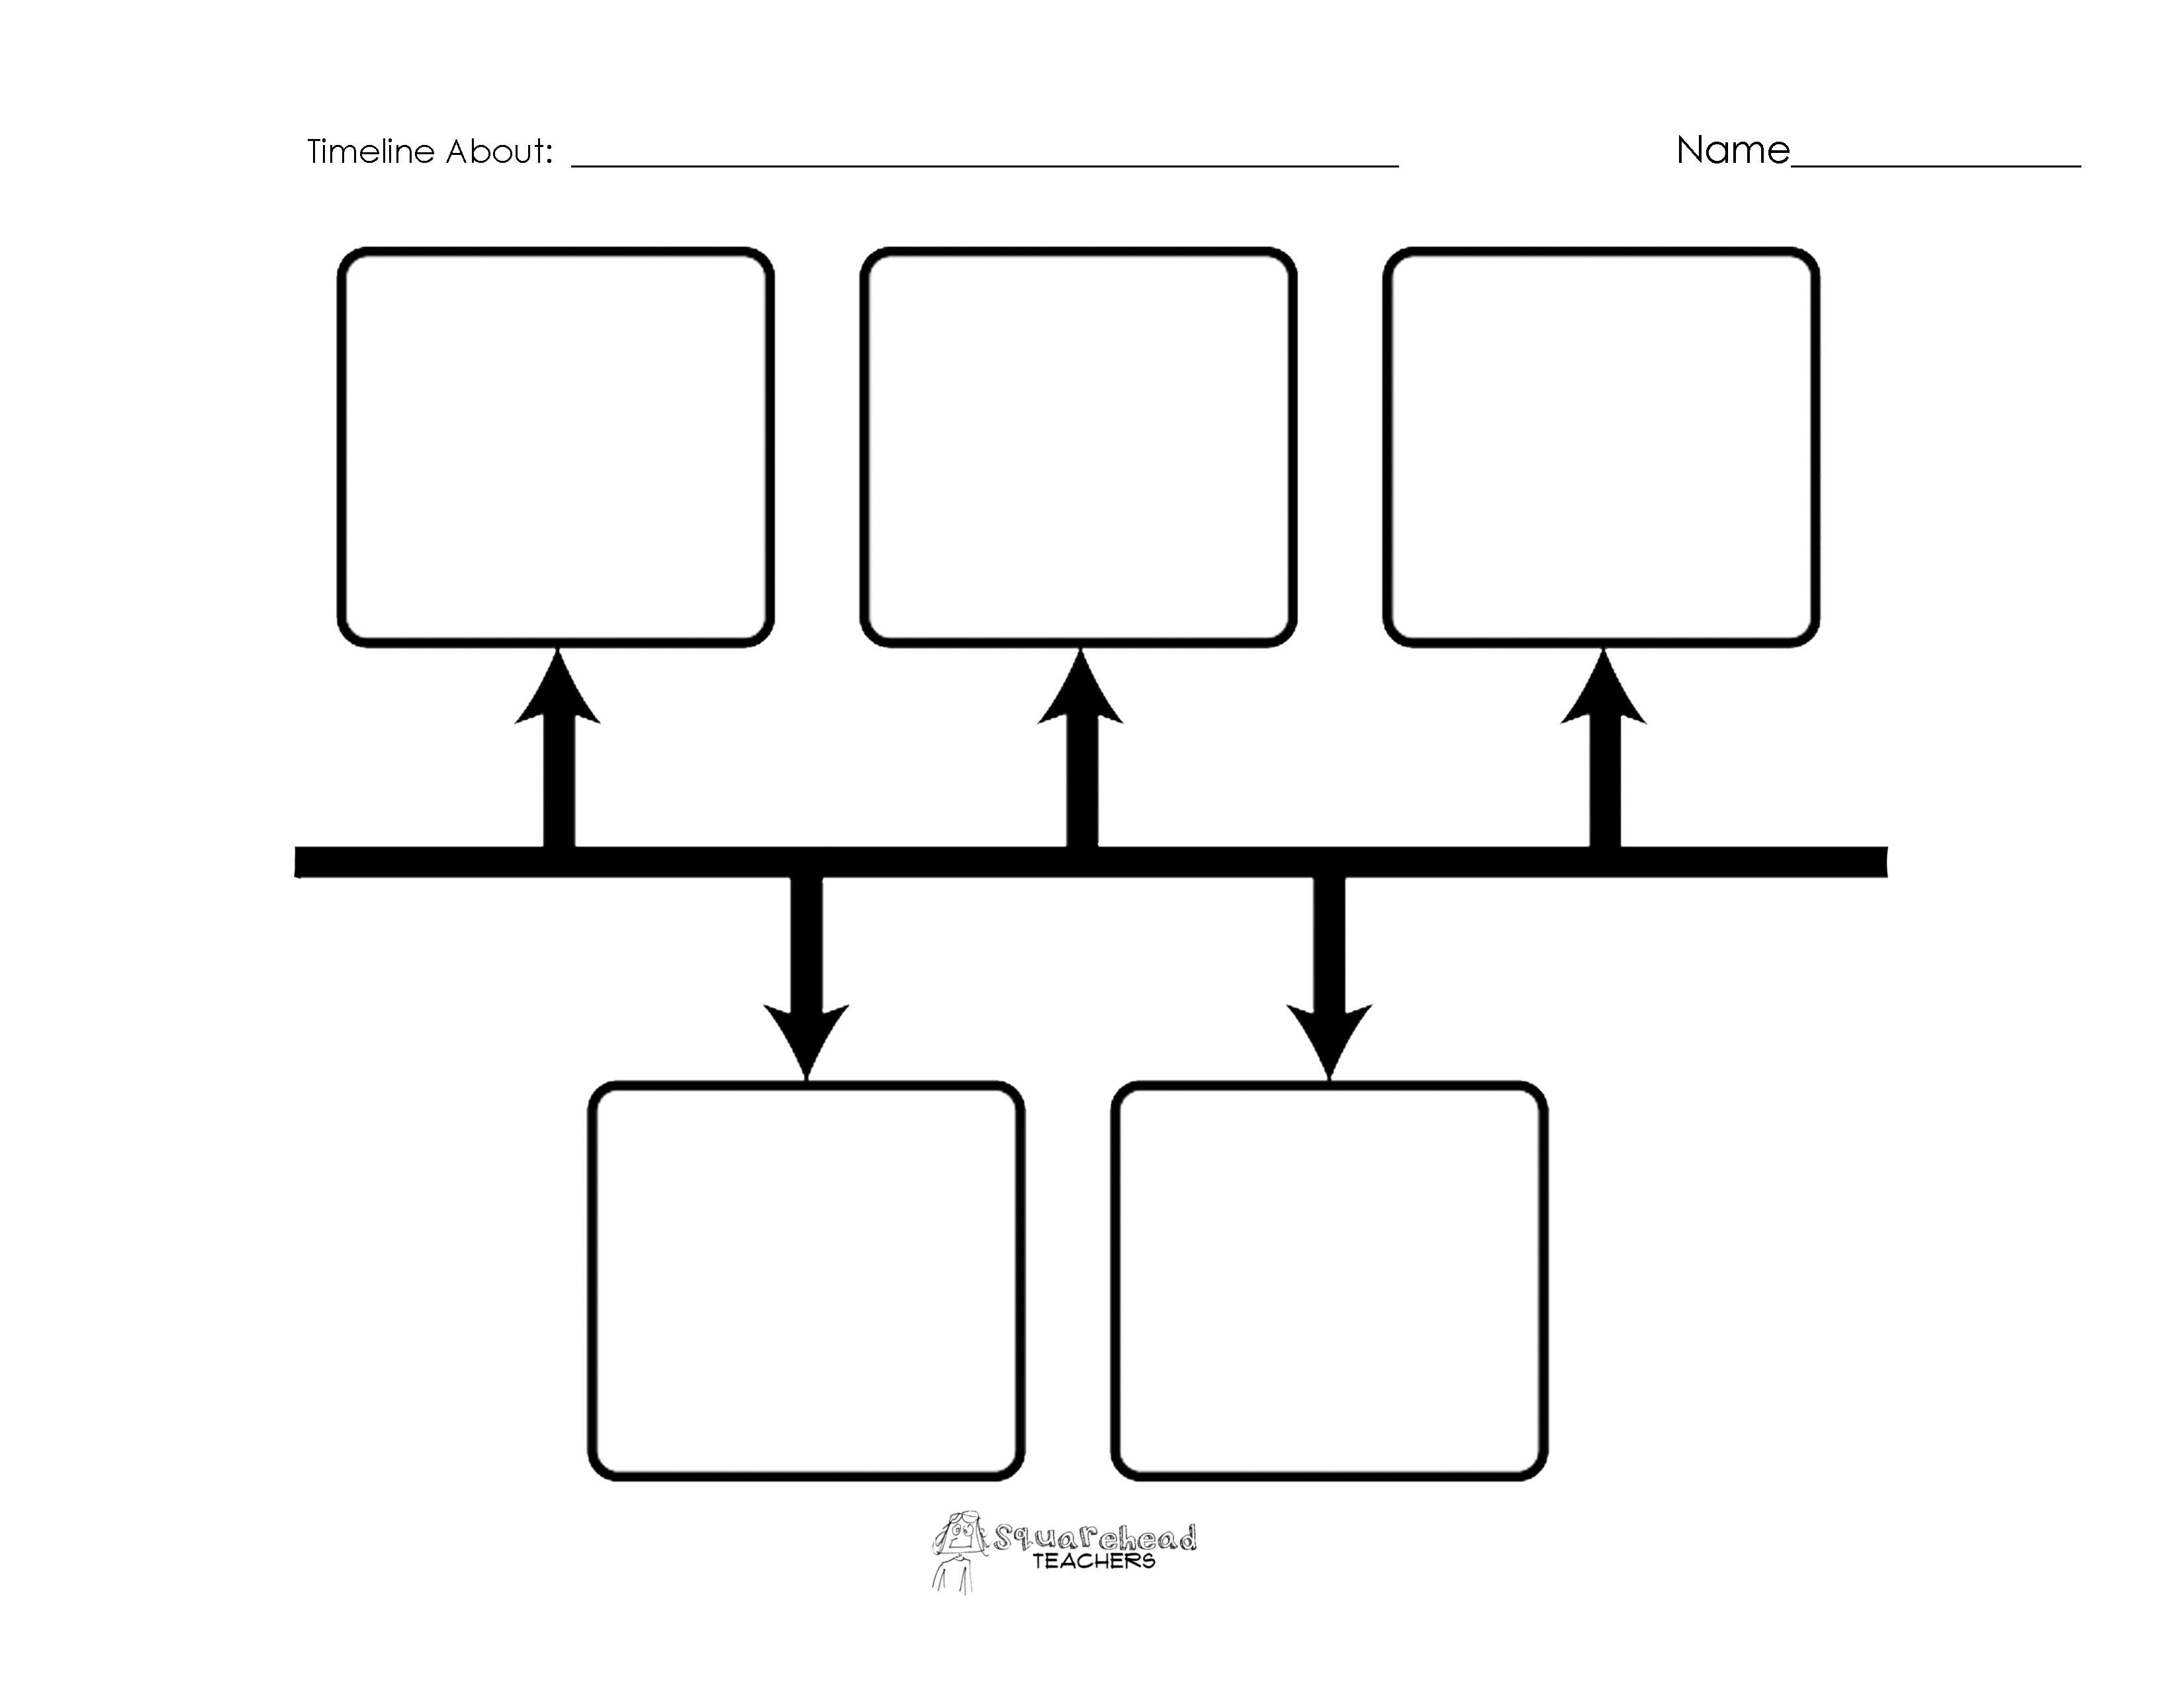 Free Timeline Cliparts, Download Free Clip Art, Free Clip.